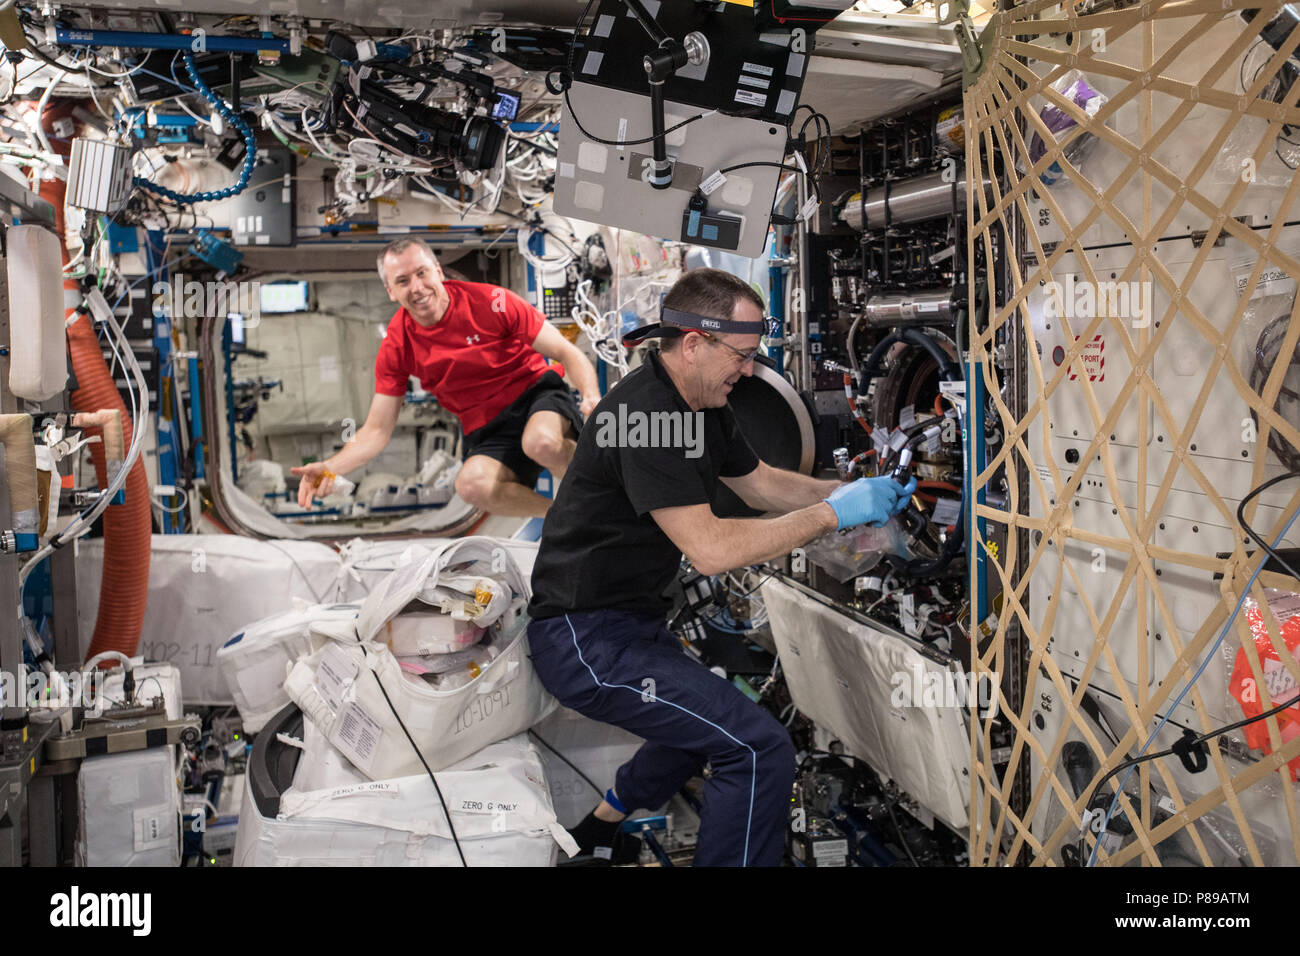 NASA astronauts Ricky Arnold, foreground, and Drew Feustel performs maintenance inside the Combustion Integrated Rack to set up the Advanced Combustion via Microgravity Experiments in the International Space Station June 19, 2018 in Earth Orbit. Stock Photo